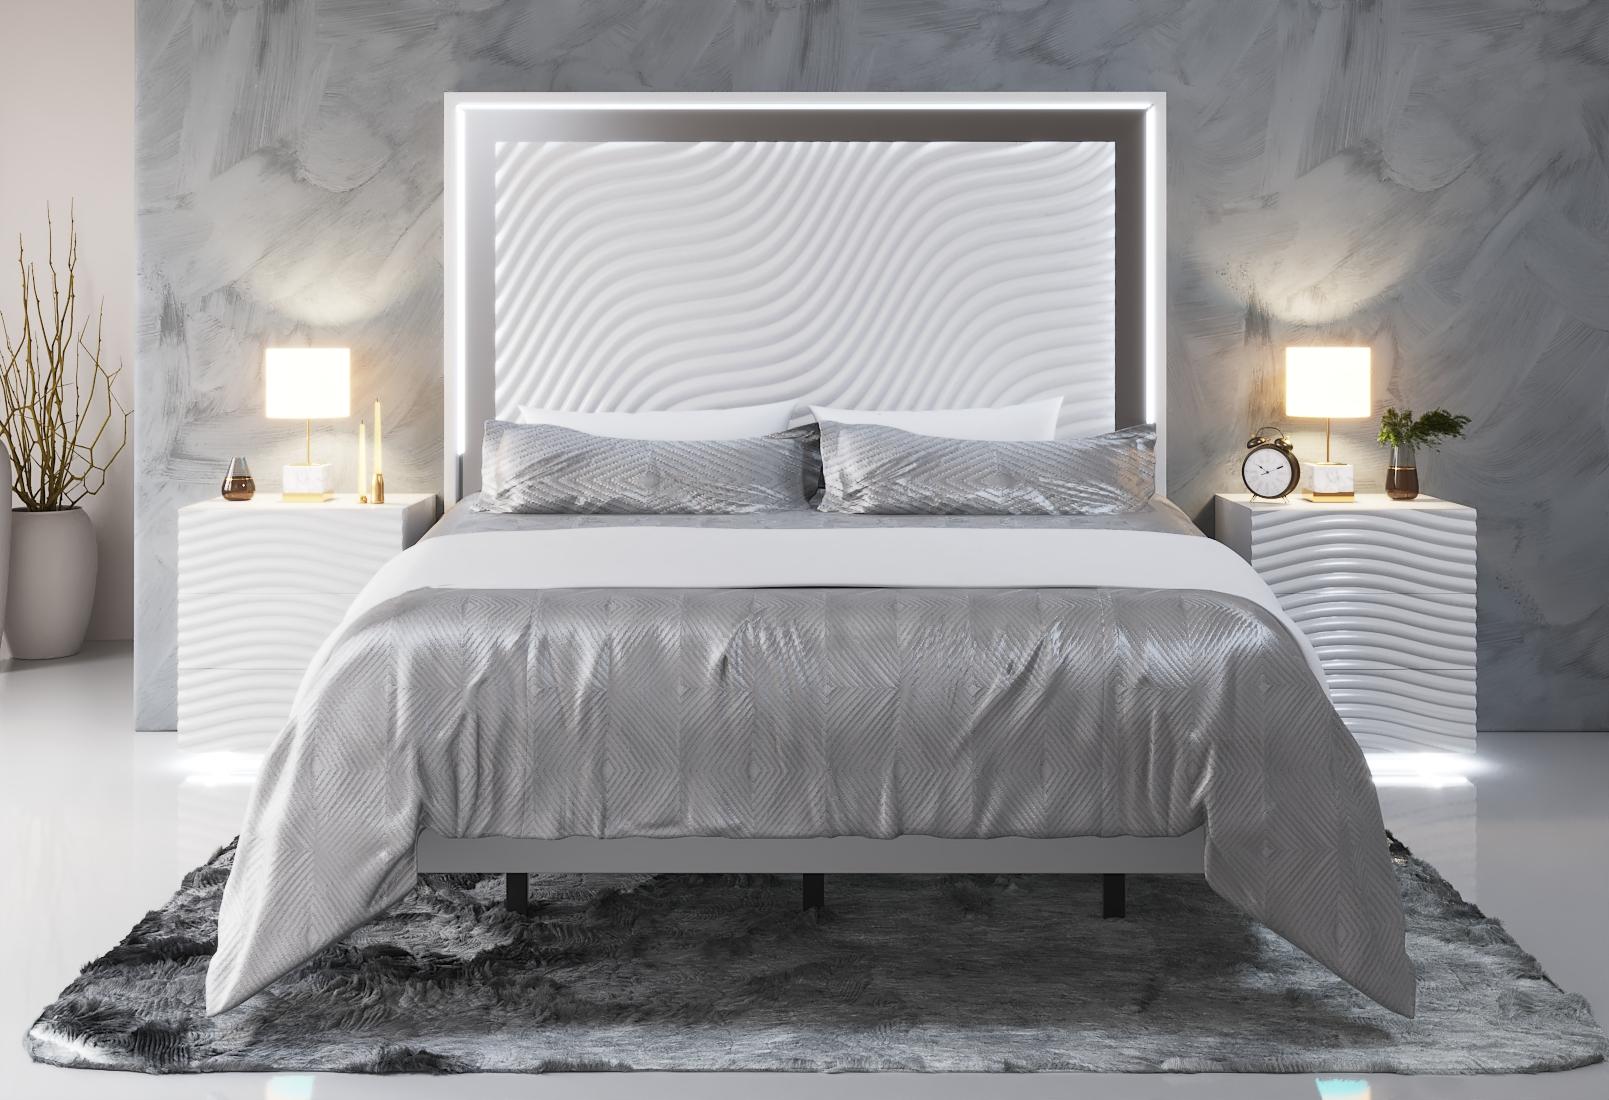 

    
Glam Shiny White King Bedroom Set 3 WAVE ESF Contemporary Modern MADE IN SPAIN
